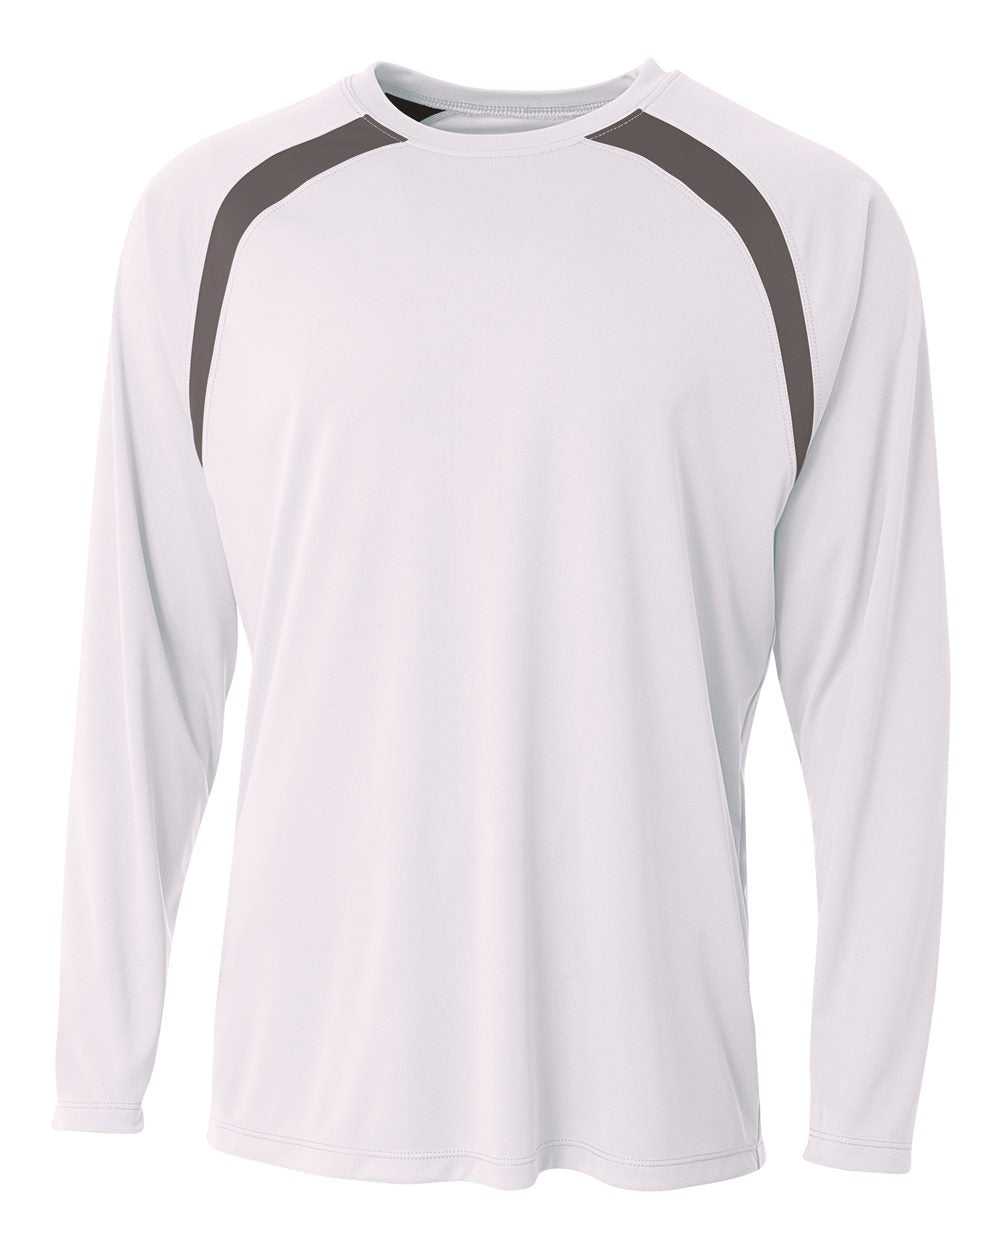 A4 N3003 Spartan Long Sleeve Color Block Crew - White Graphite - HIT a Double